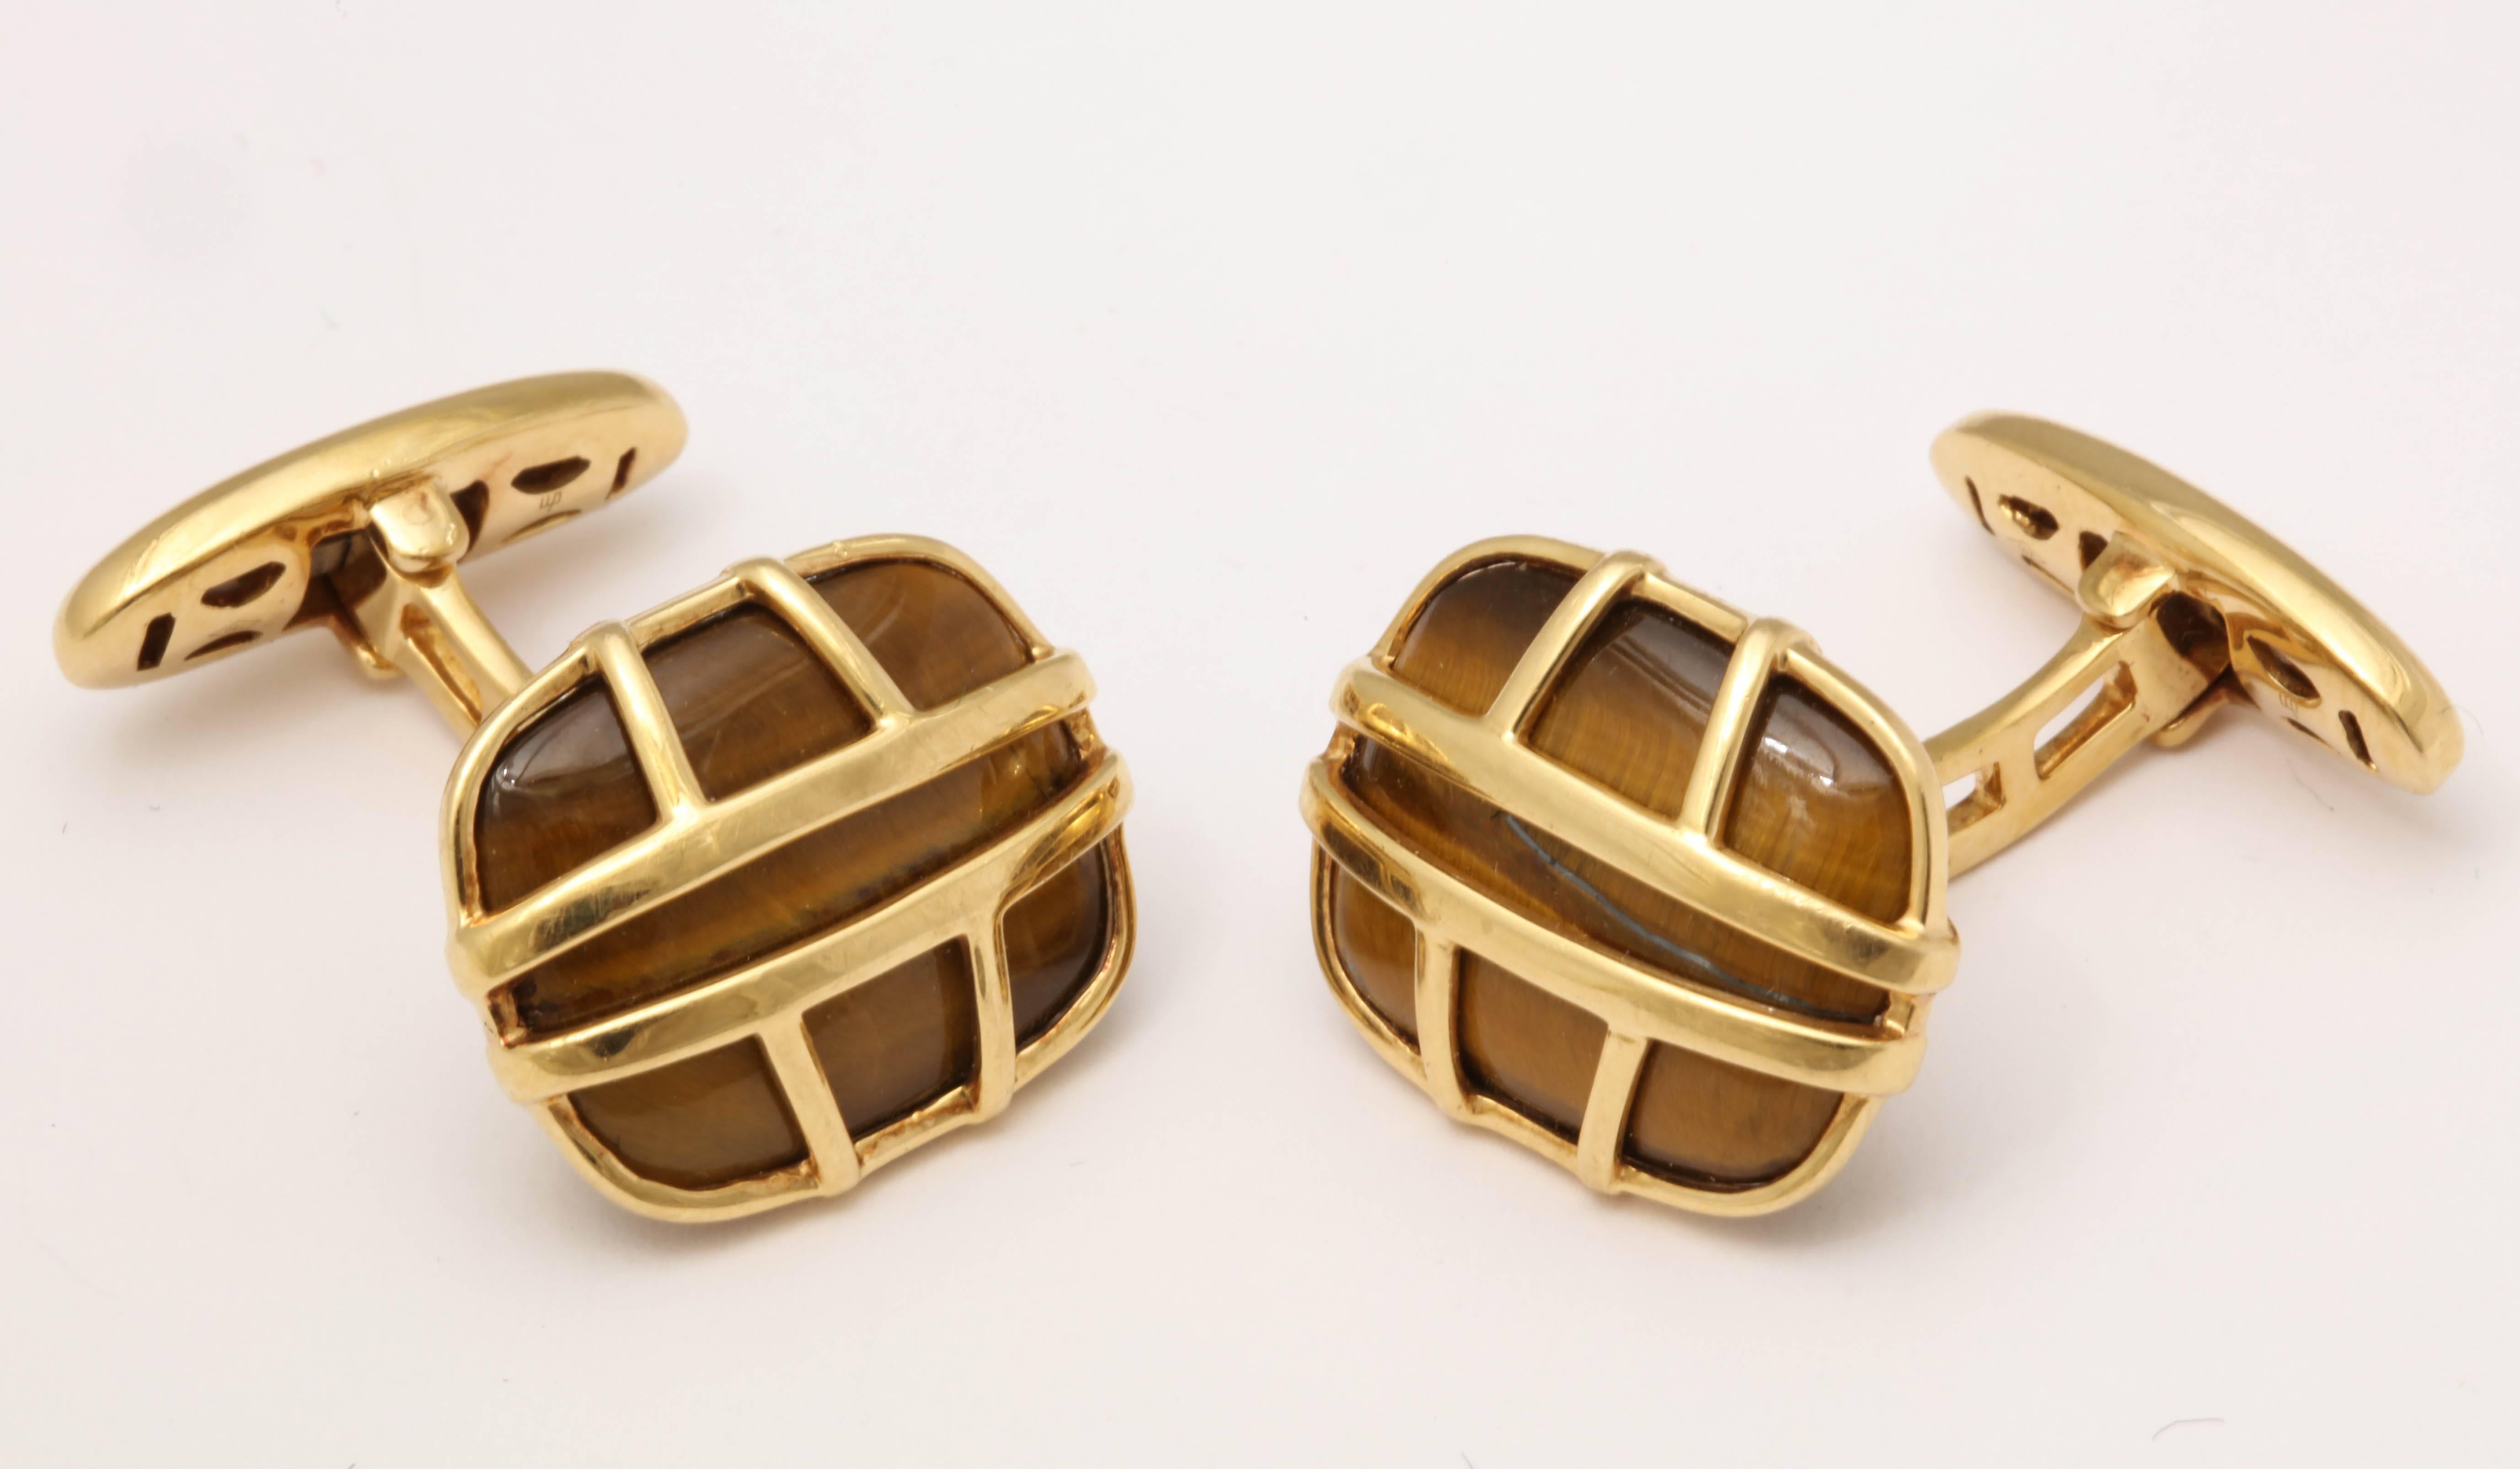 One Pair Of Gentlemen's 18kt Yellow Gold Flip Up And Flip Down Easy wear cufflinks Designed with Two Large Cushion Shaped Oval Tiger's Eye Stones Measuring approximately 22Mm Each Stone Set In A Cage Effect Gold workmanship Style Design.. Designed